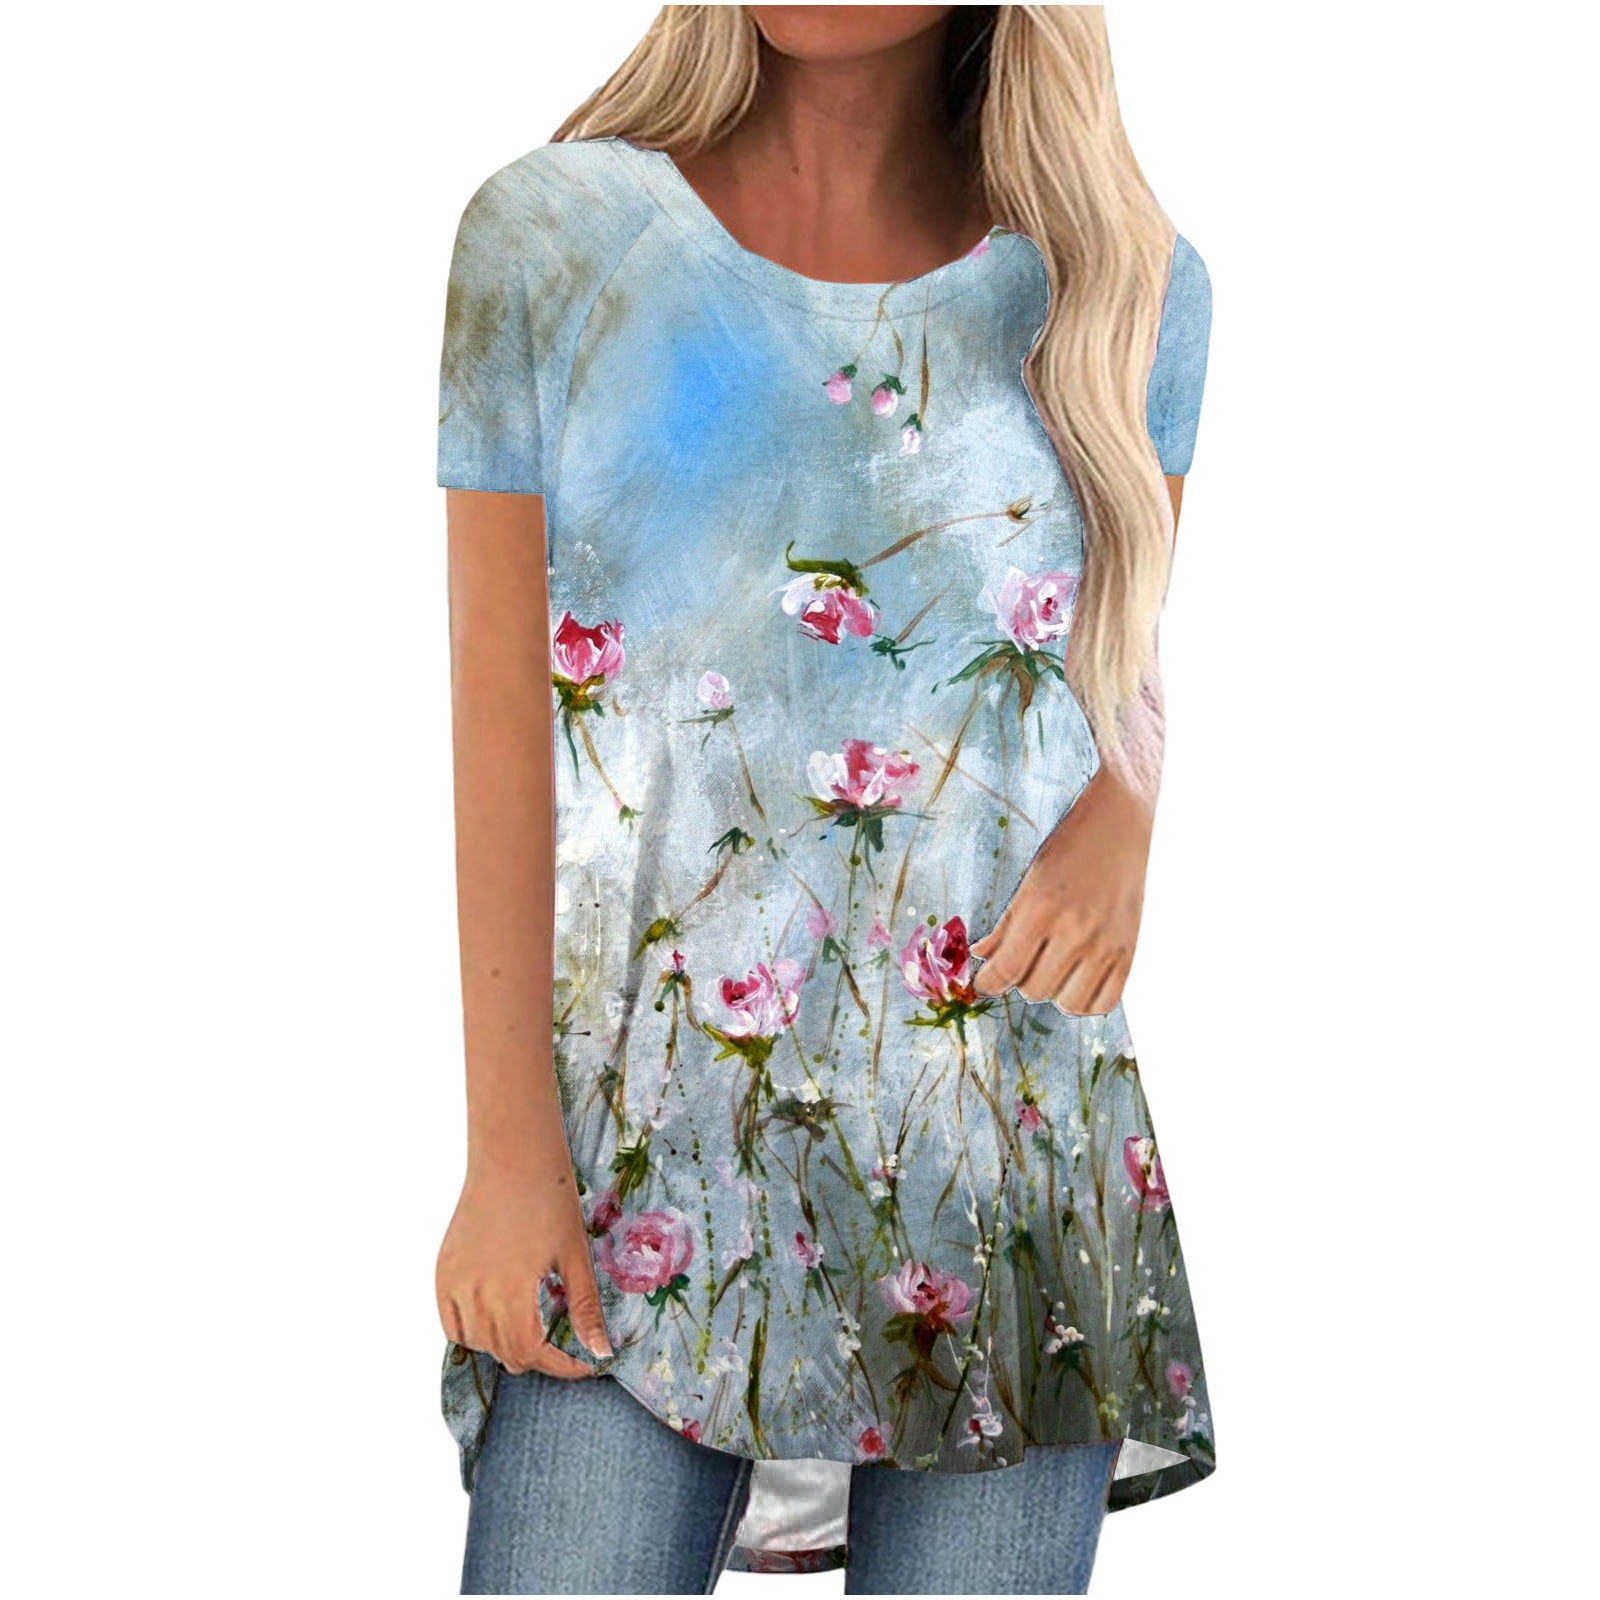 ZQGJB Summer Shirts for Women Cute Floral Printed Casual Short Sleeve ...